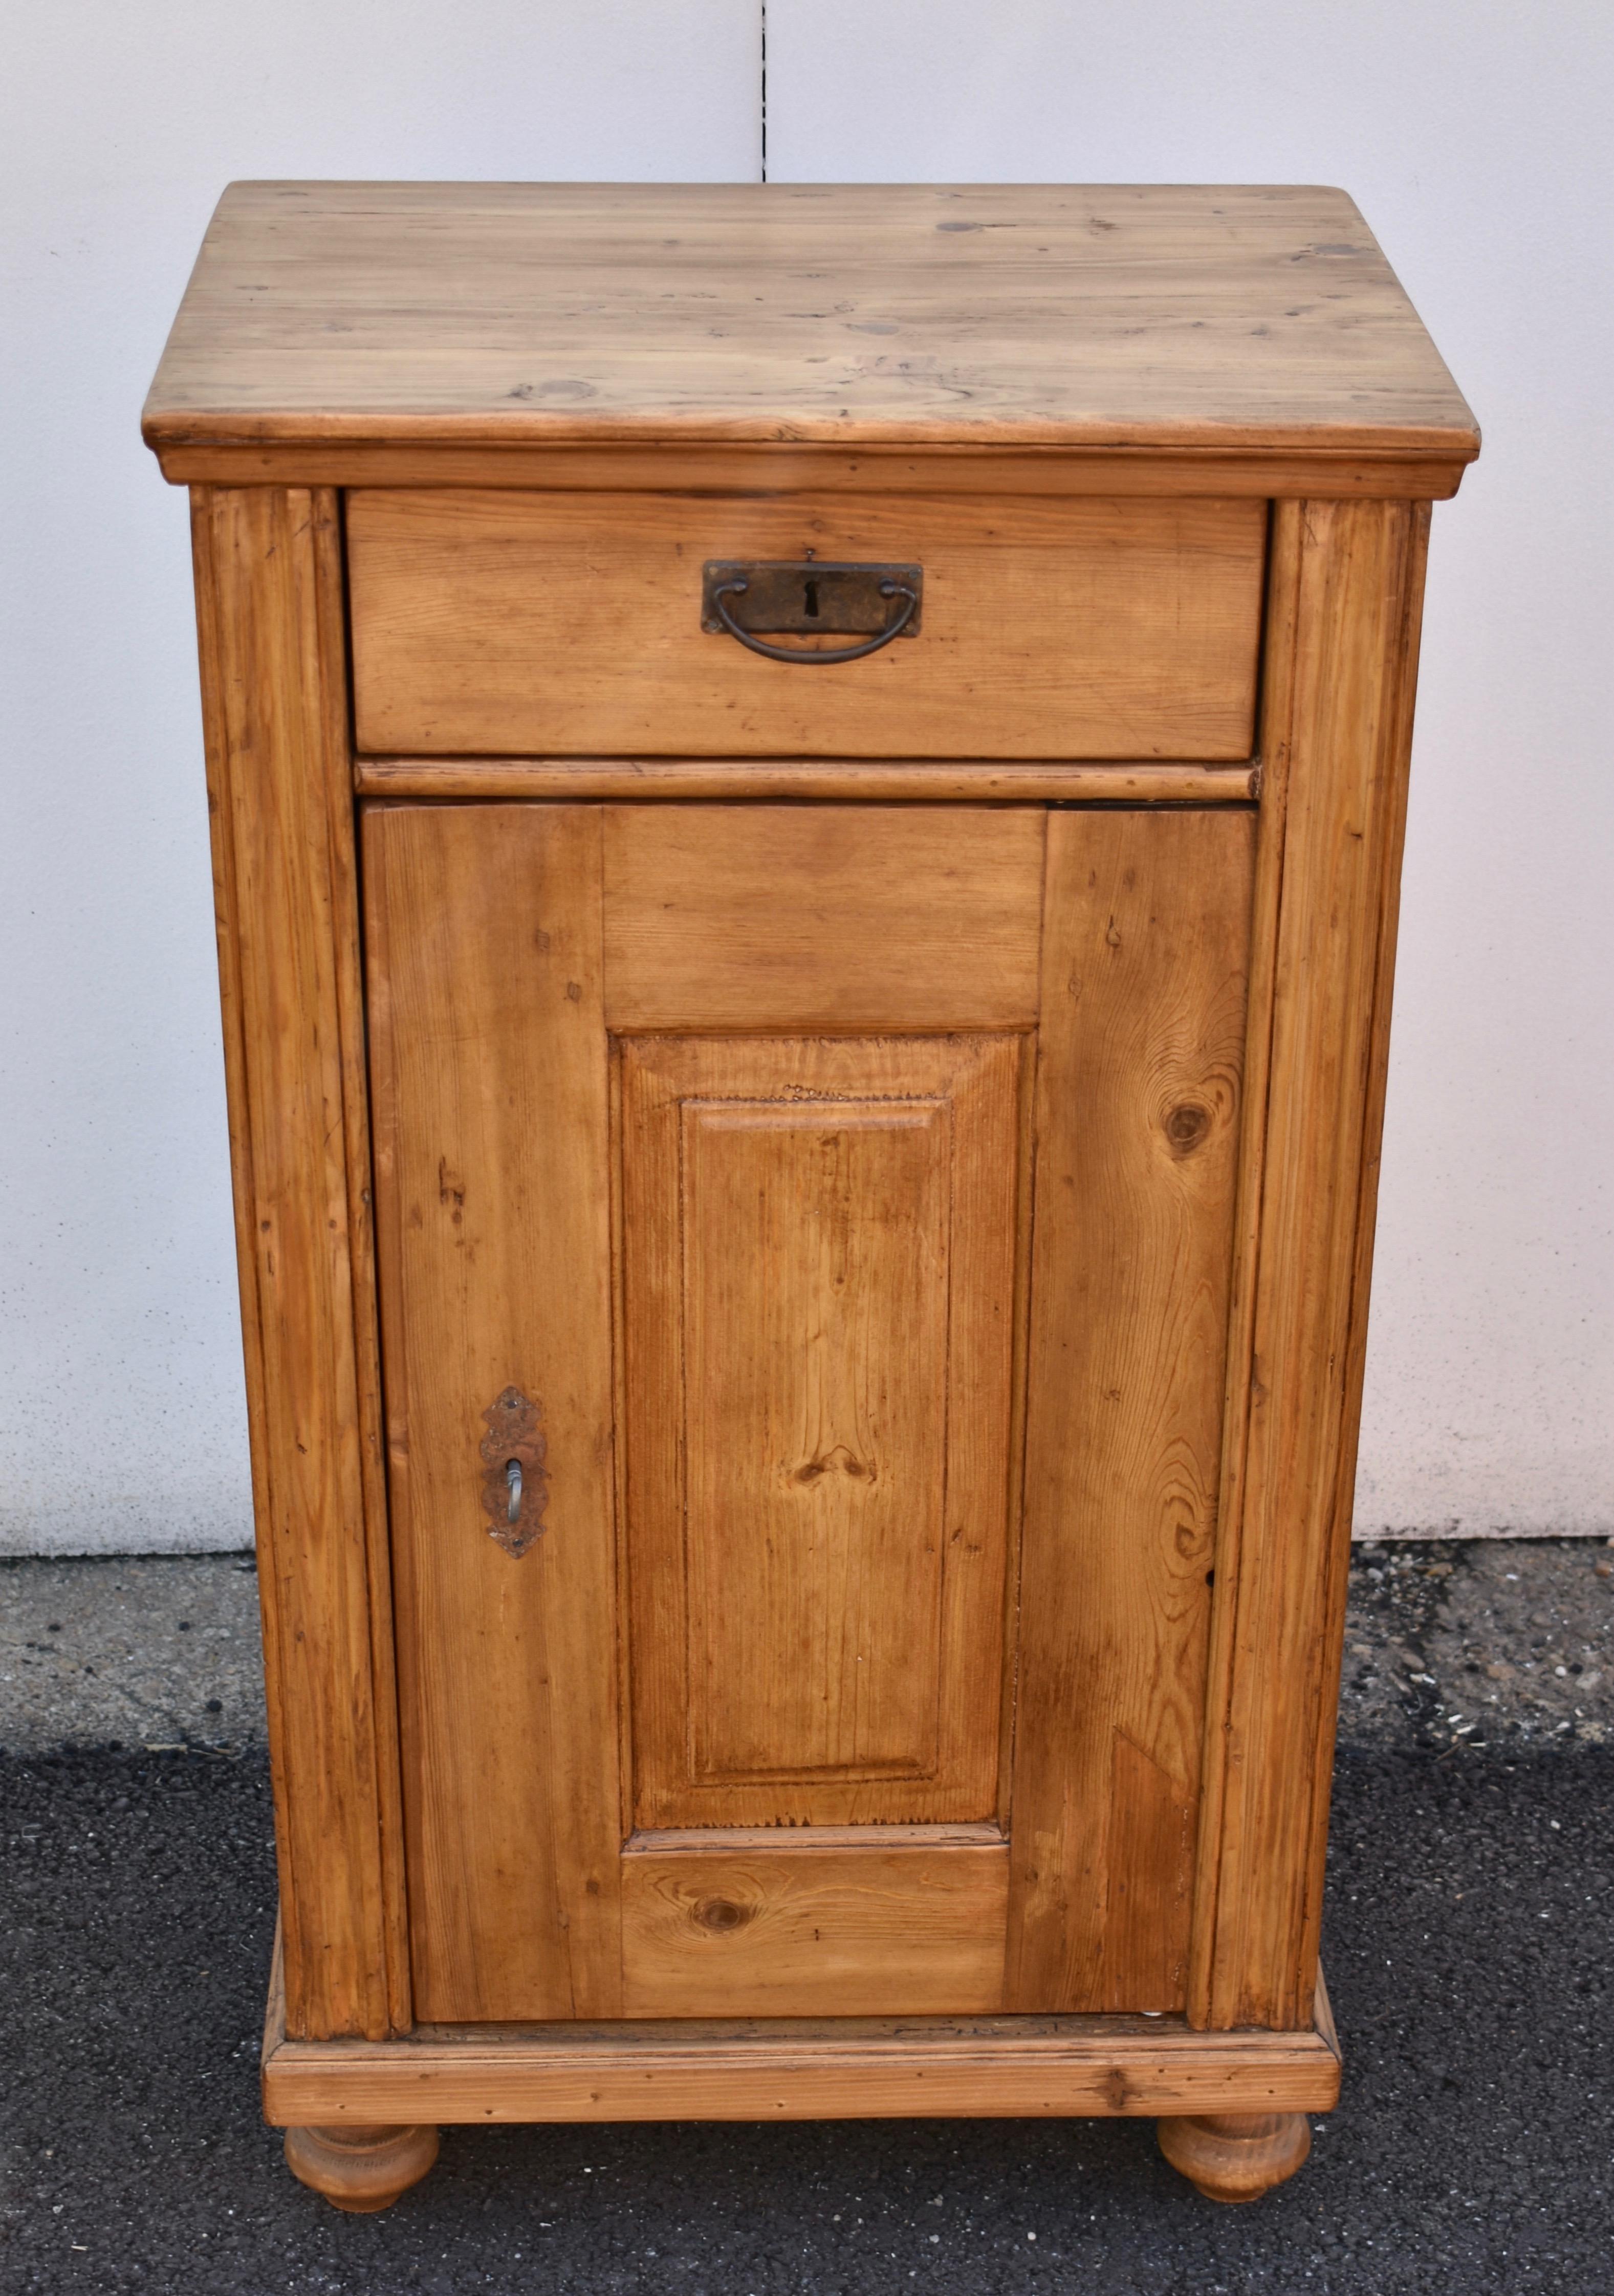 This is a truly lovely side cupboard. It has great color, very clear wood, and stands beautifully. From its two tier crown, its hand-cut dovetailed drawer and the wide fluting on the front cormners, to the broad rails and stiles of the door frame